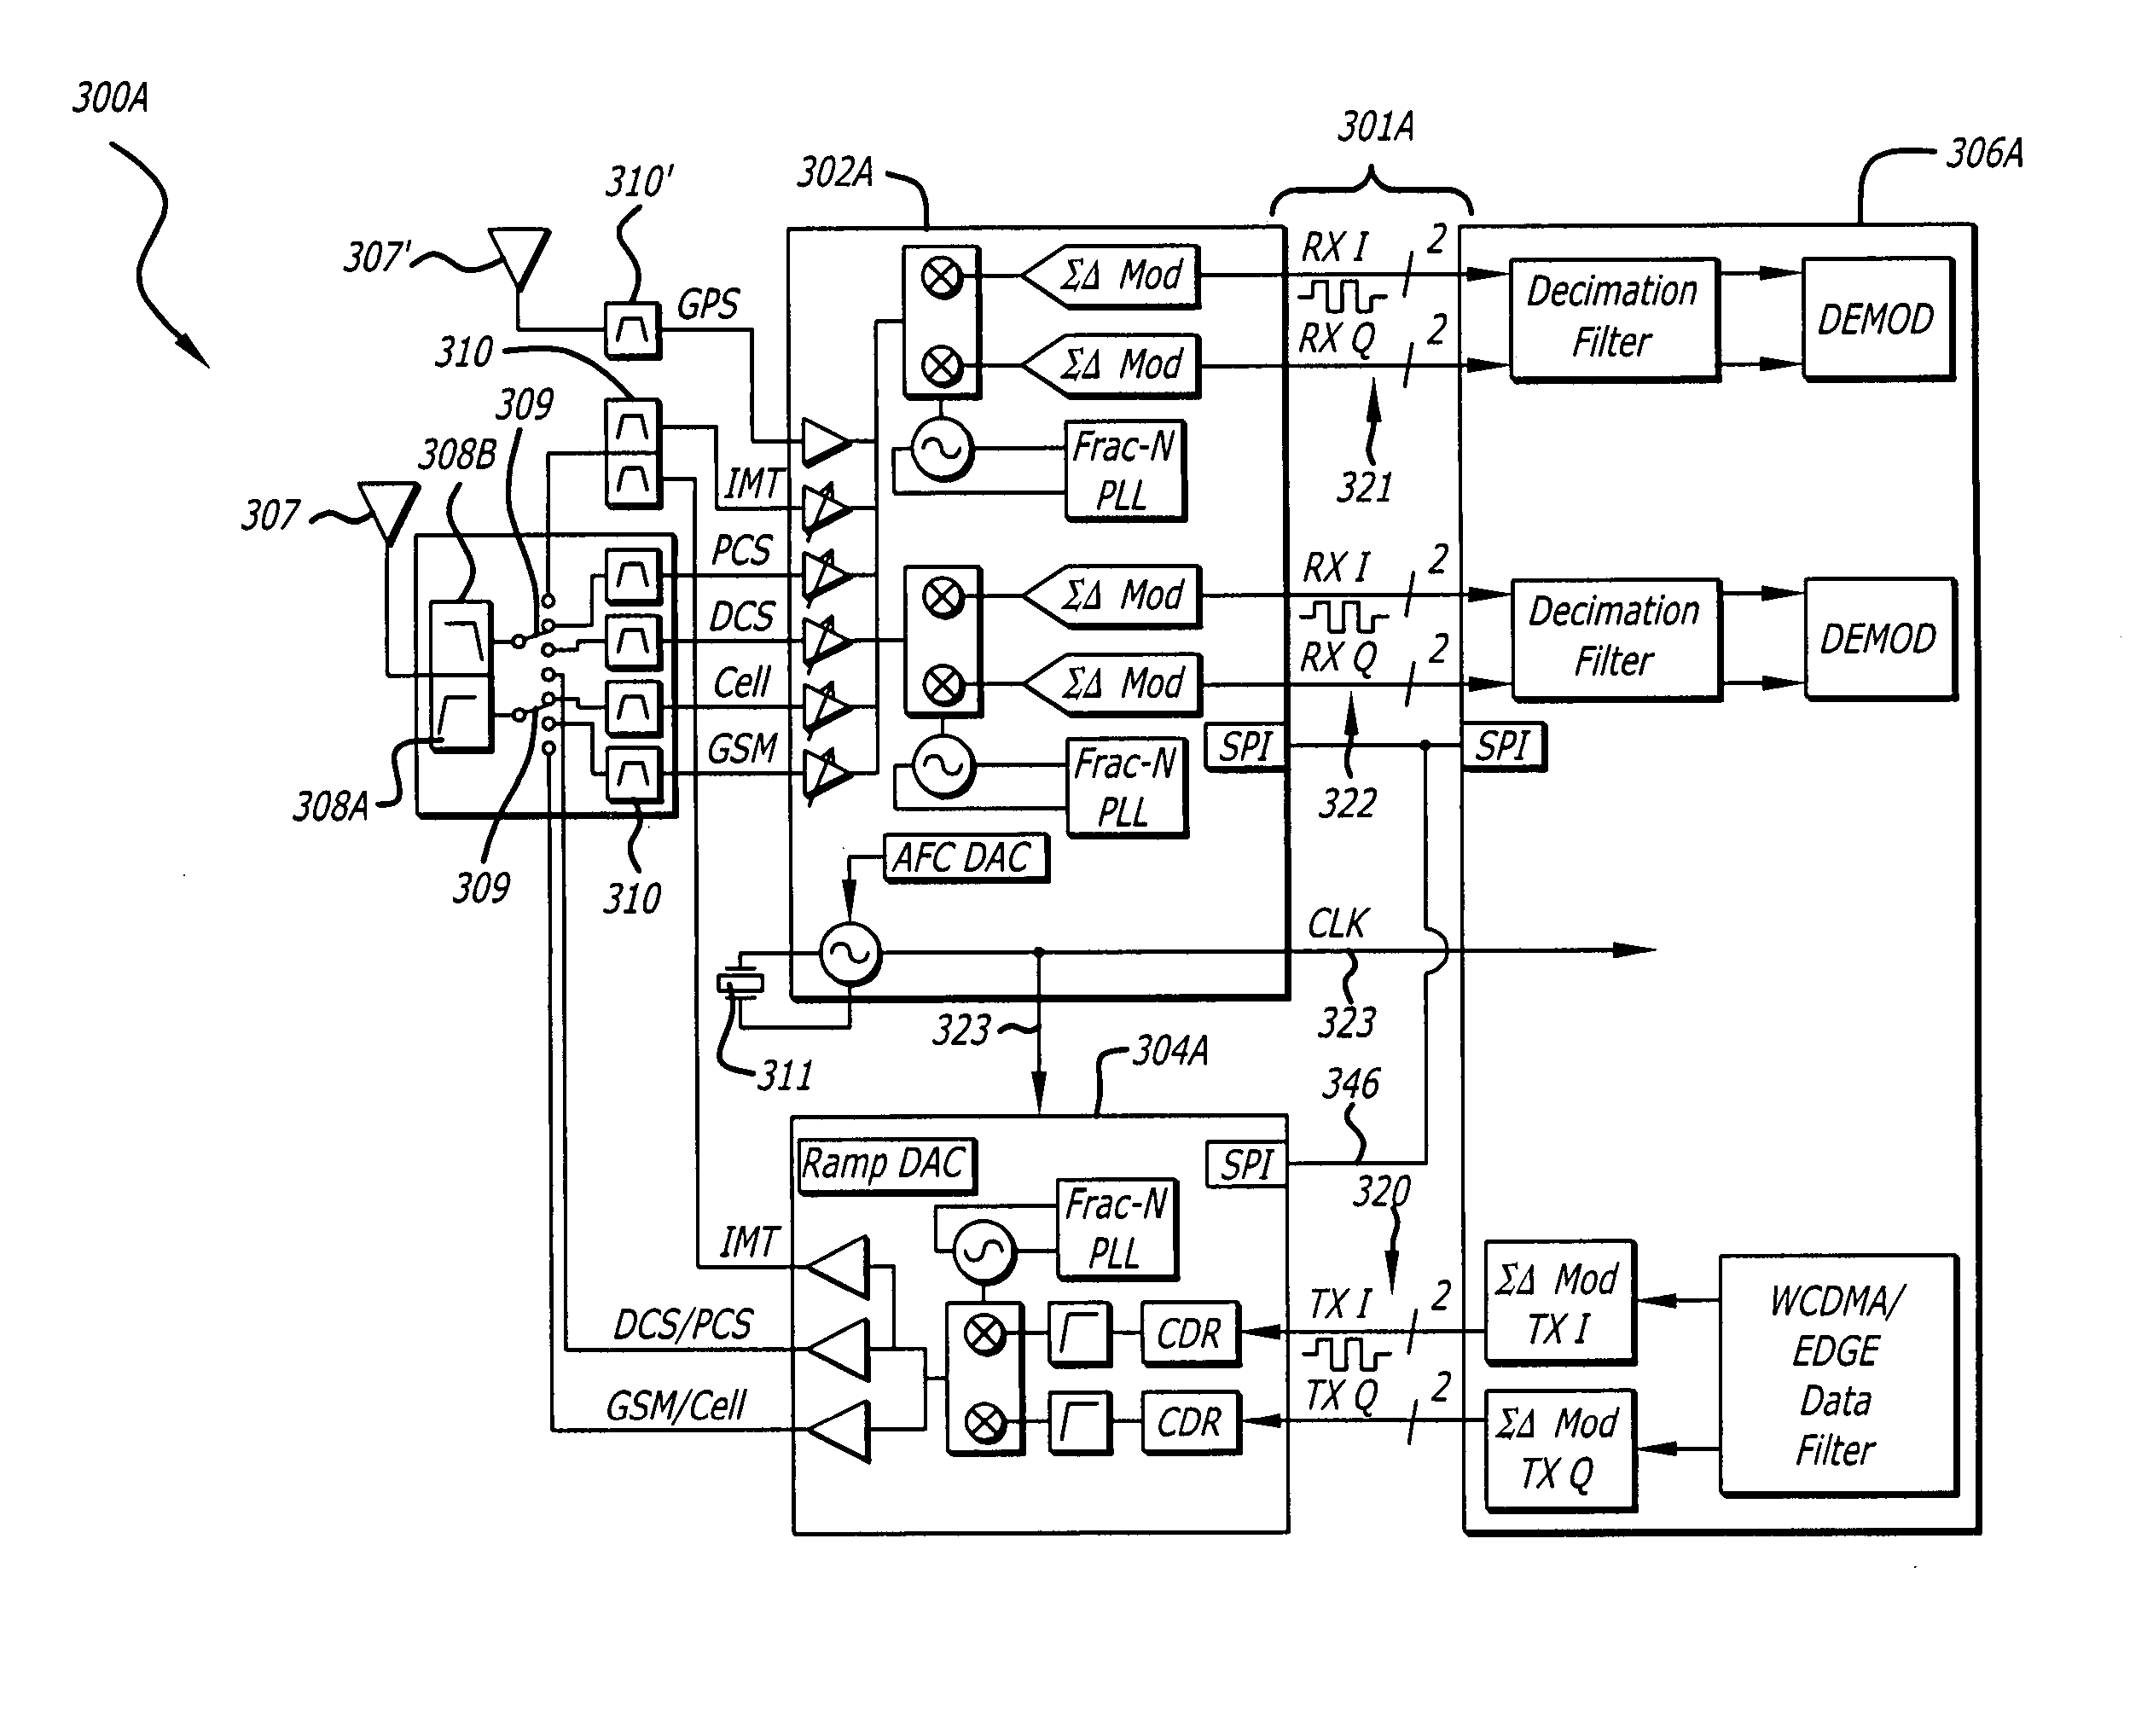 Serial digital interface for wireless network radios and baseband integrated circuits